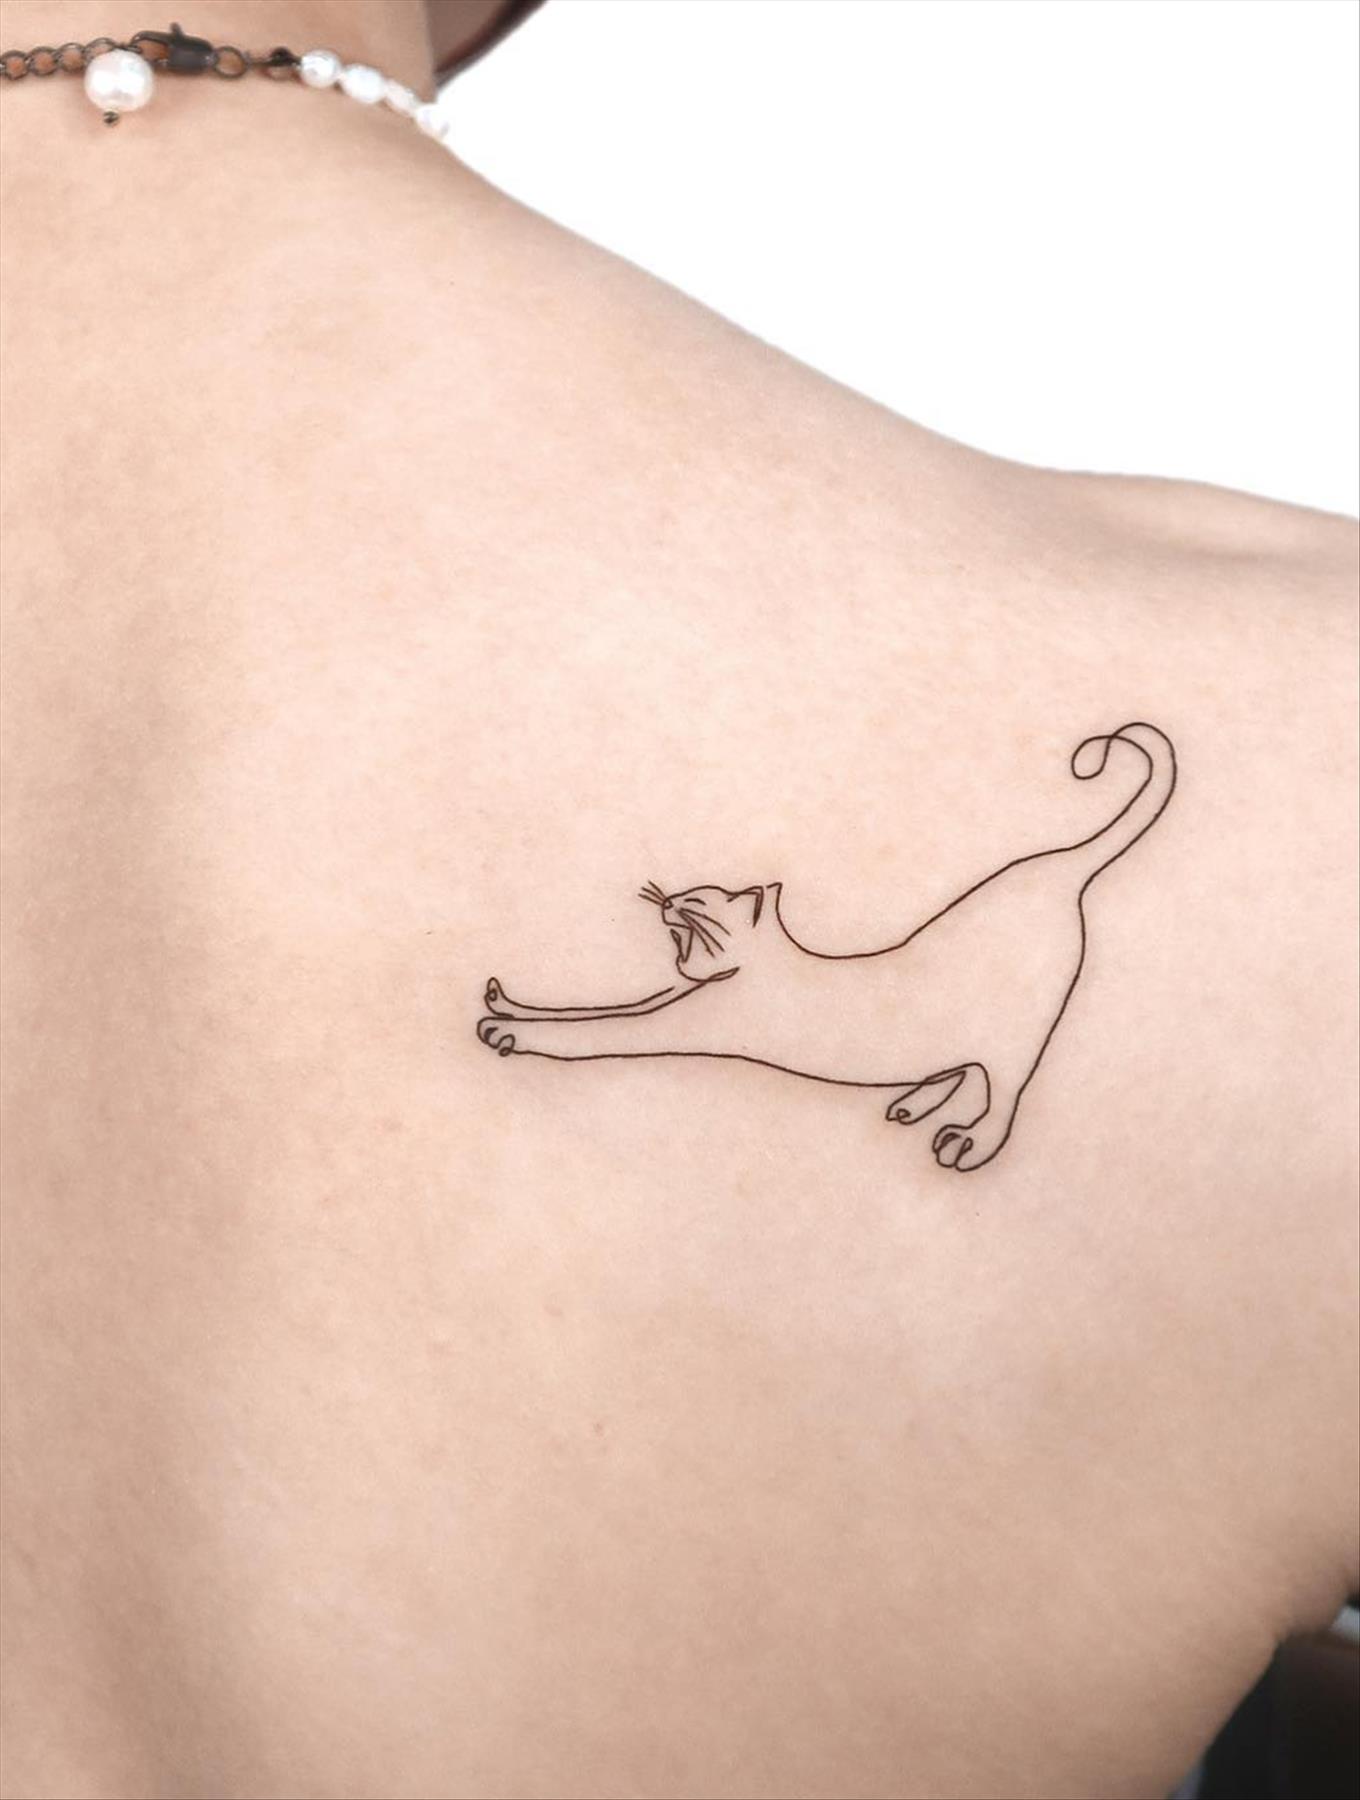 Cute cat tattoo ideas 2022 for the cat lover 